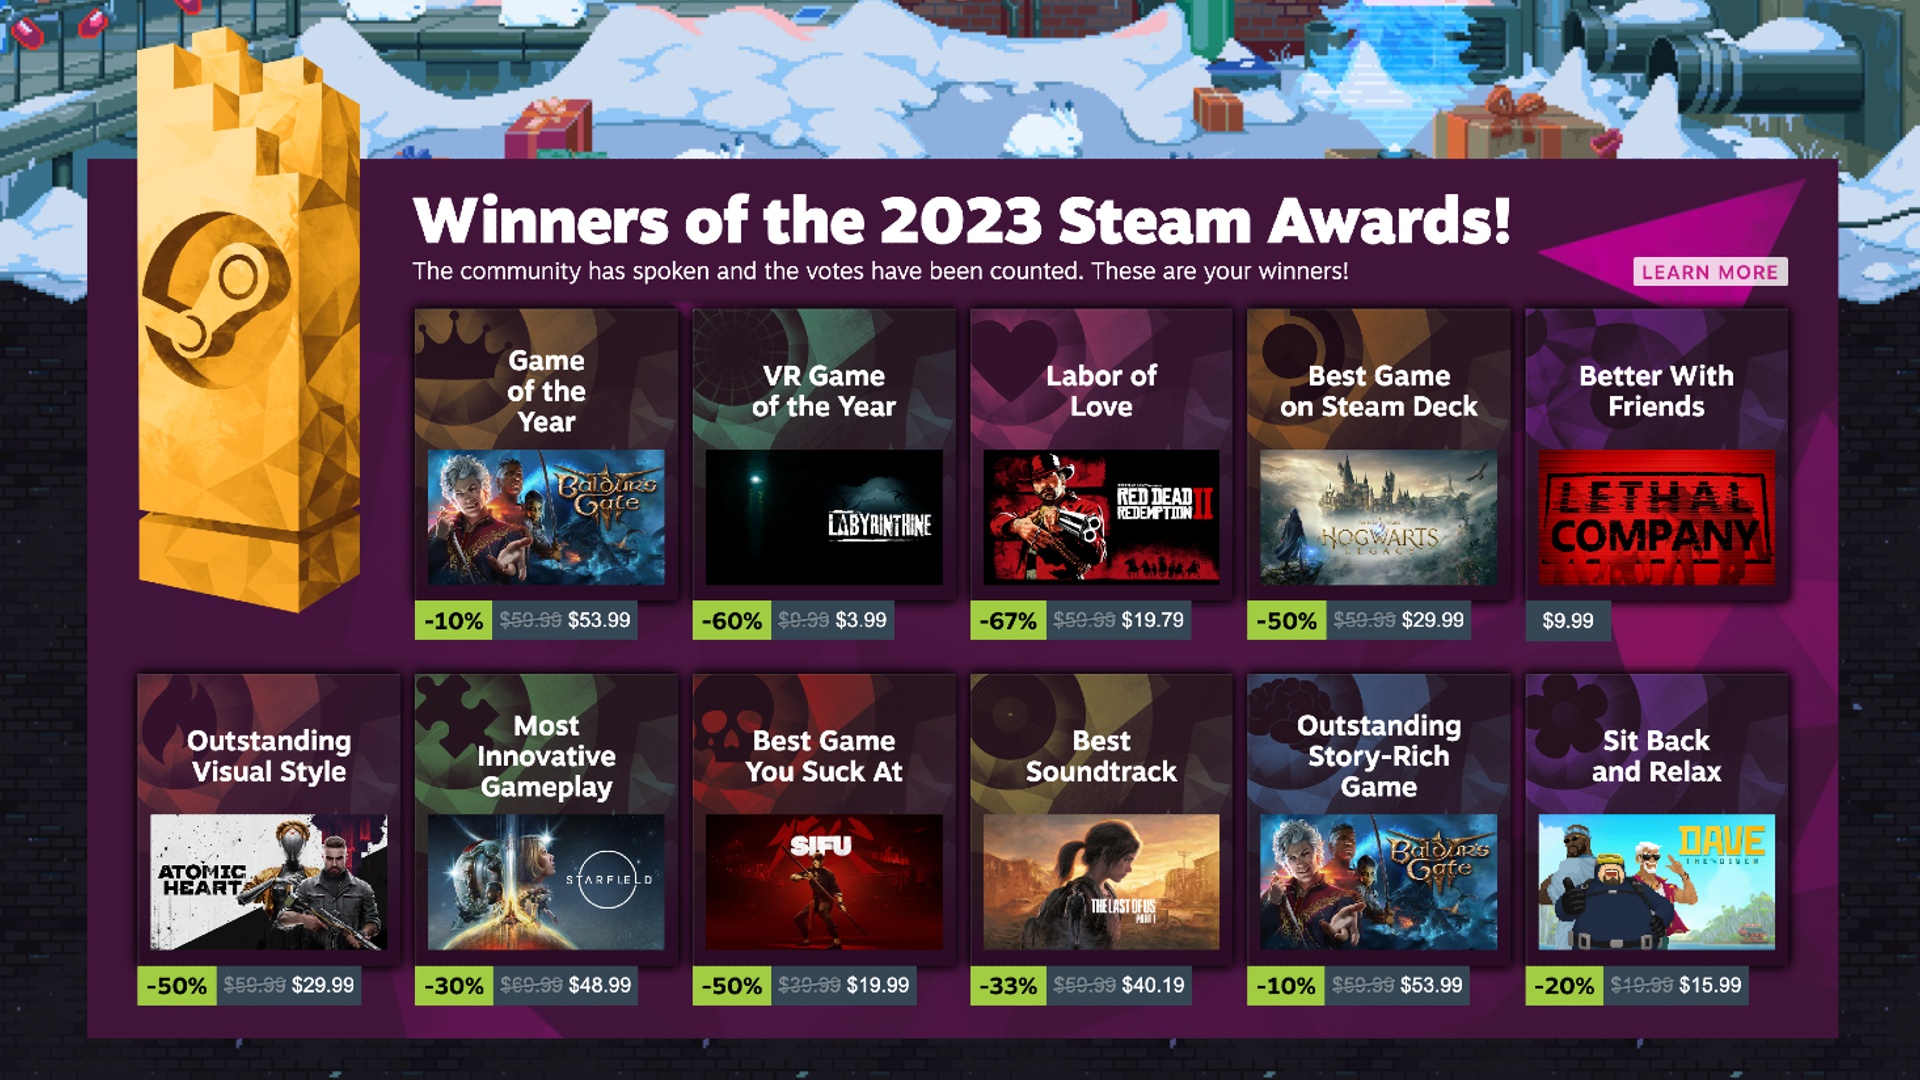 2023 Steam Awards: A screenshot of the Steam storefront showing which games won this year's awards from Valve